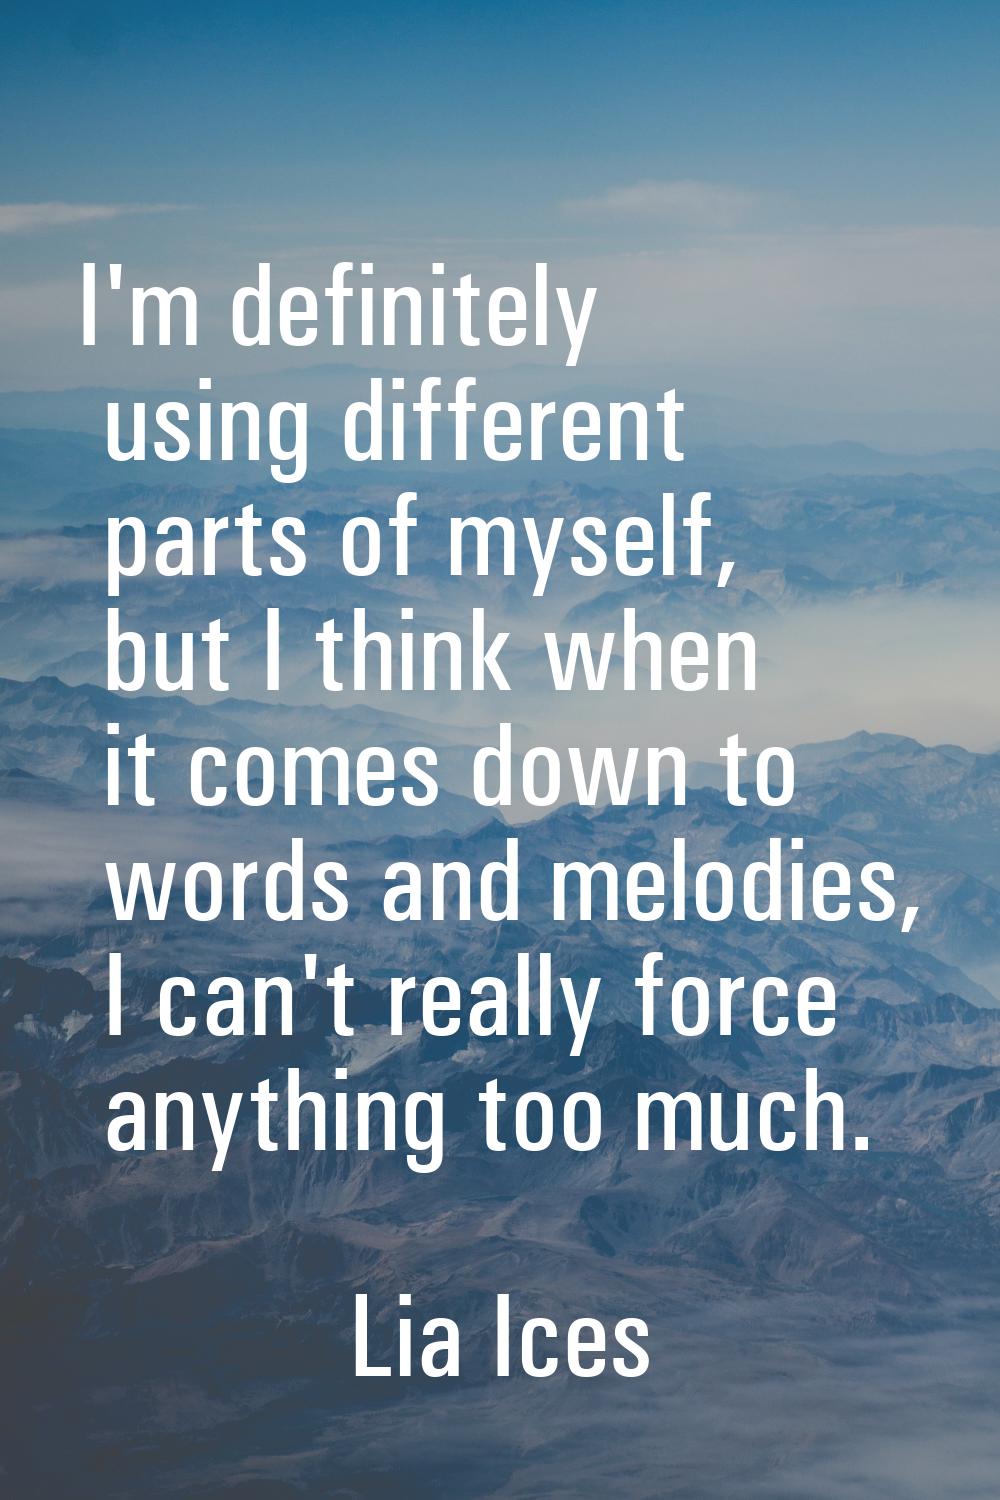 I'm definitely using different parts of myself, but I think when it comes down to words and melodie